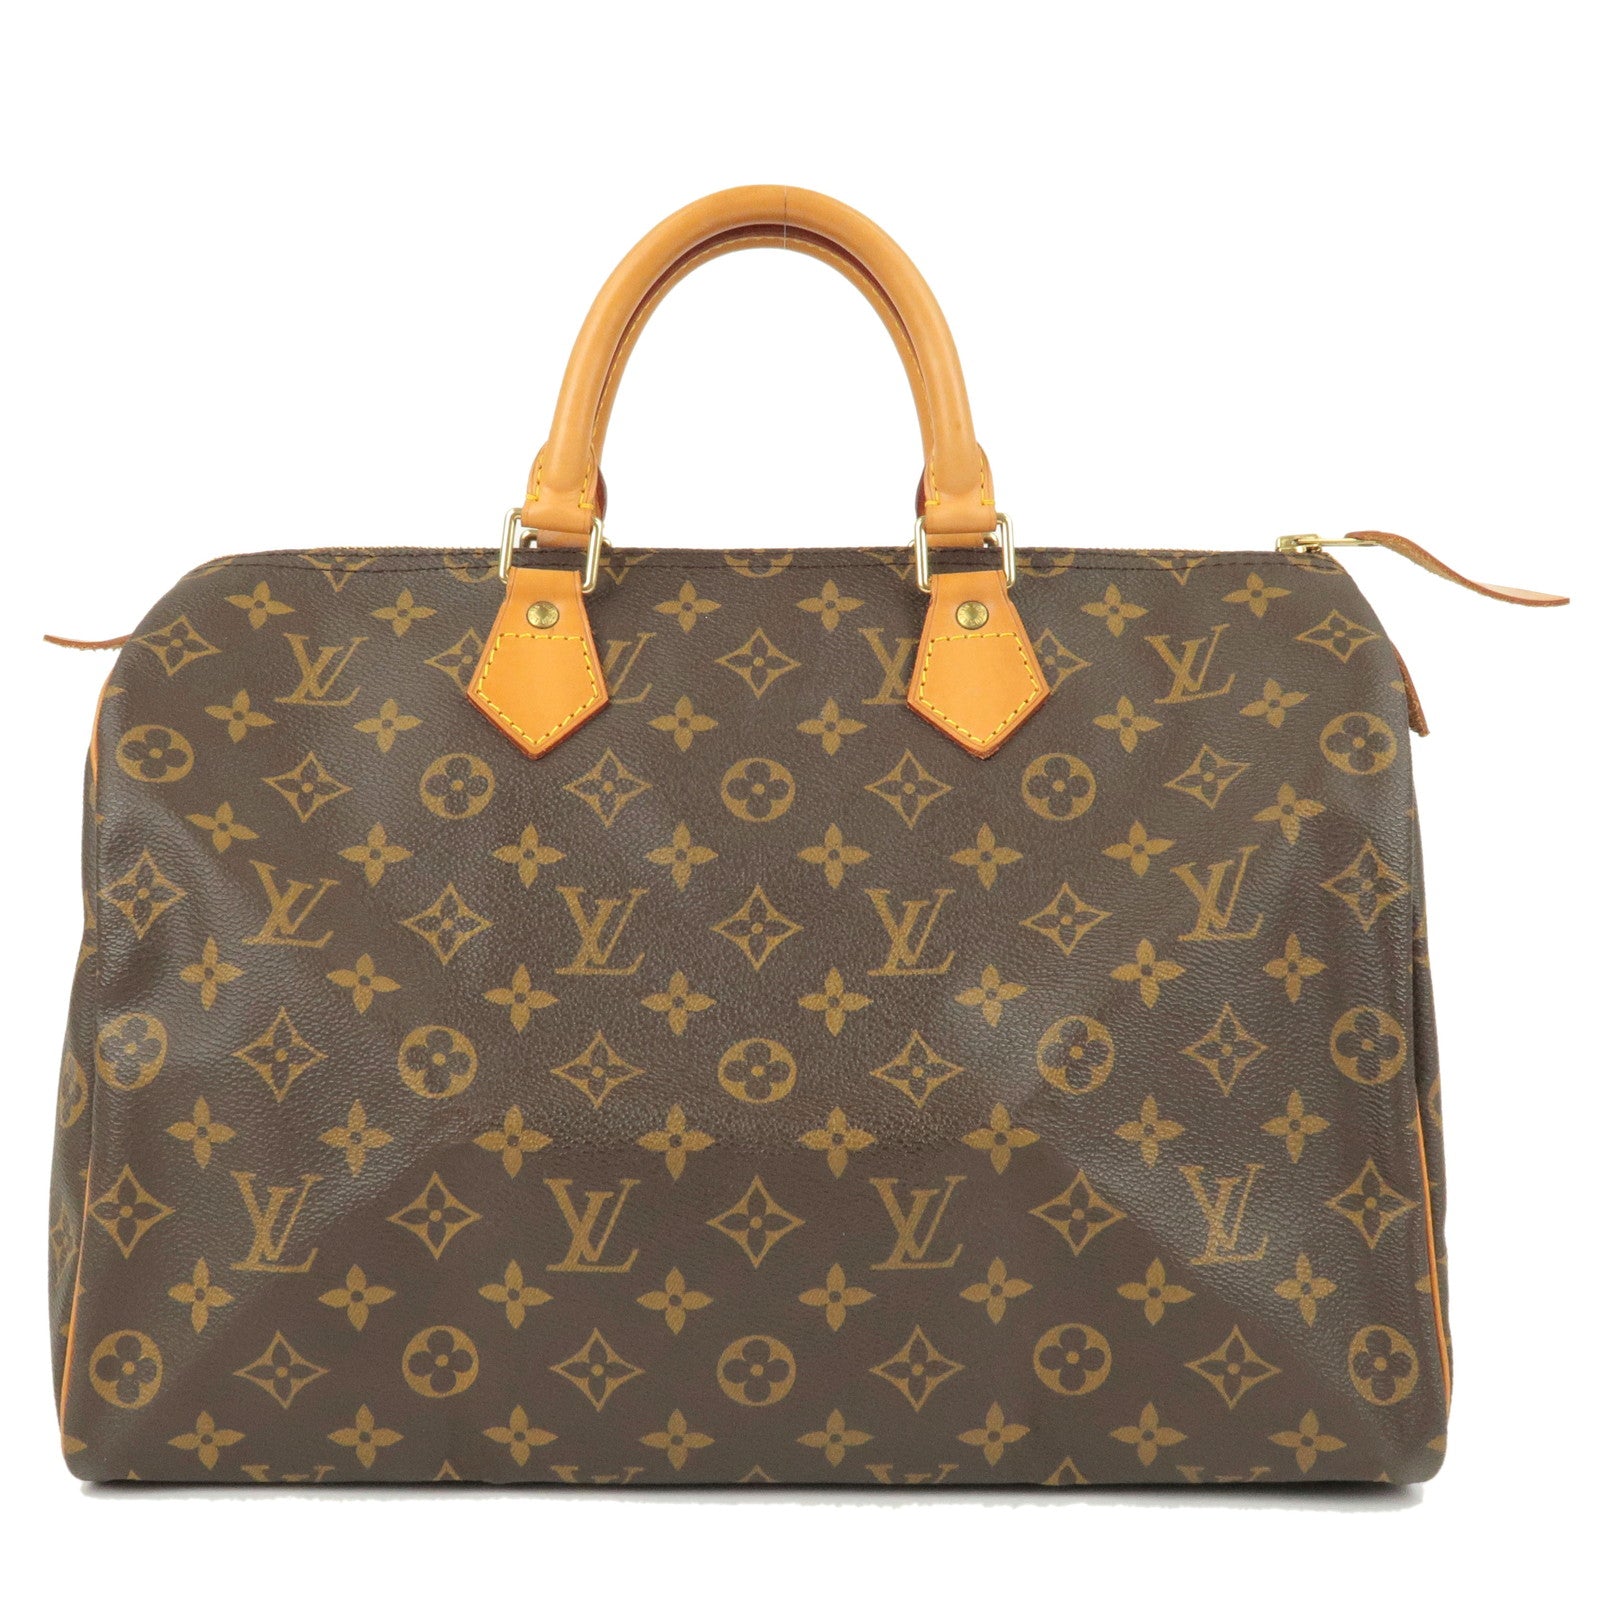 LV Louis Vuitton Philippines Speedy 25, 30, 35, 40 comparison and what fits  inside 